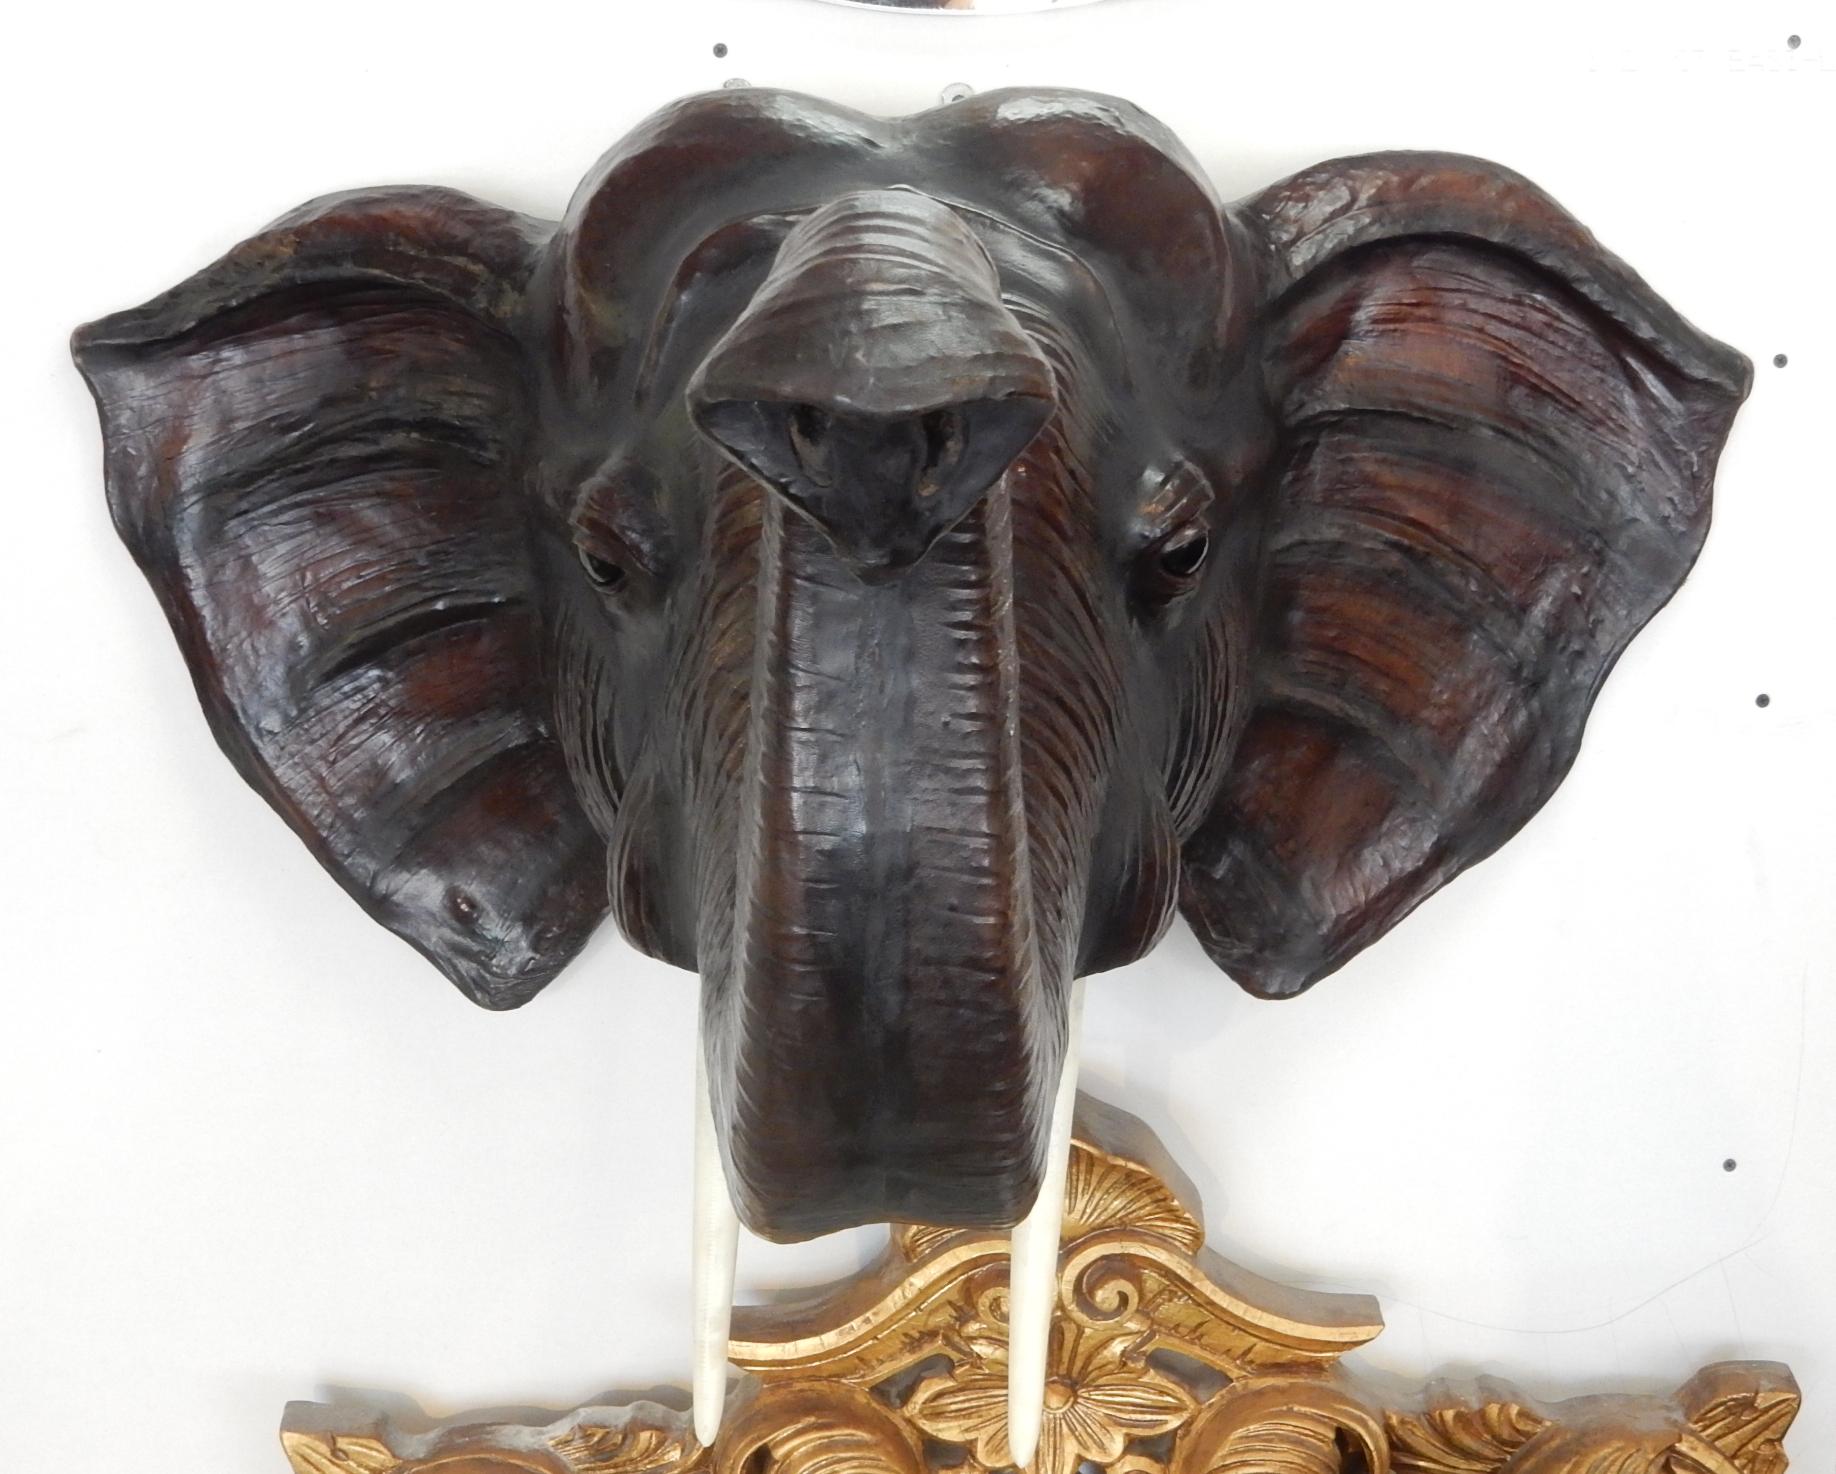 Tribal Vintage Life-Size Leather Clad Bull Elephant Bust Wall Sculpture